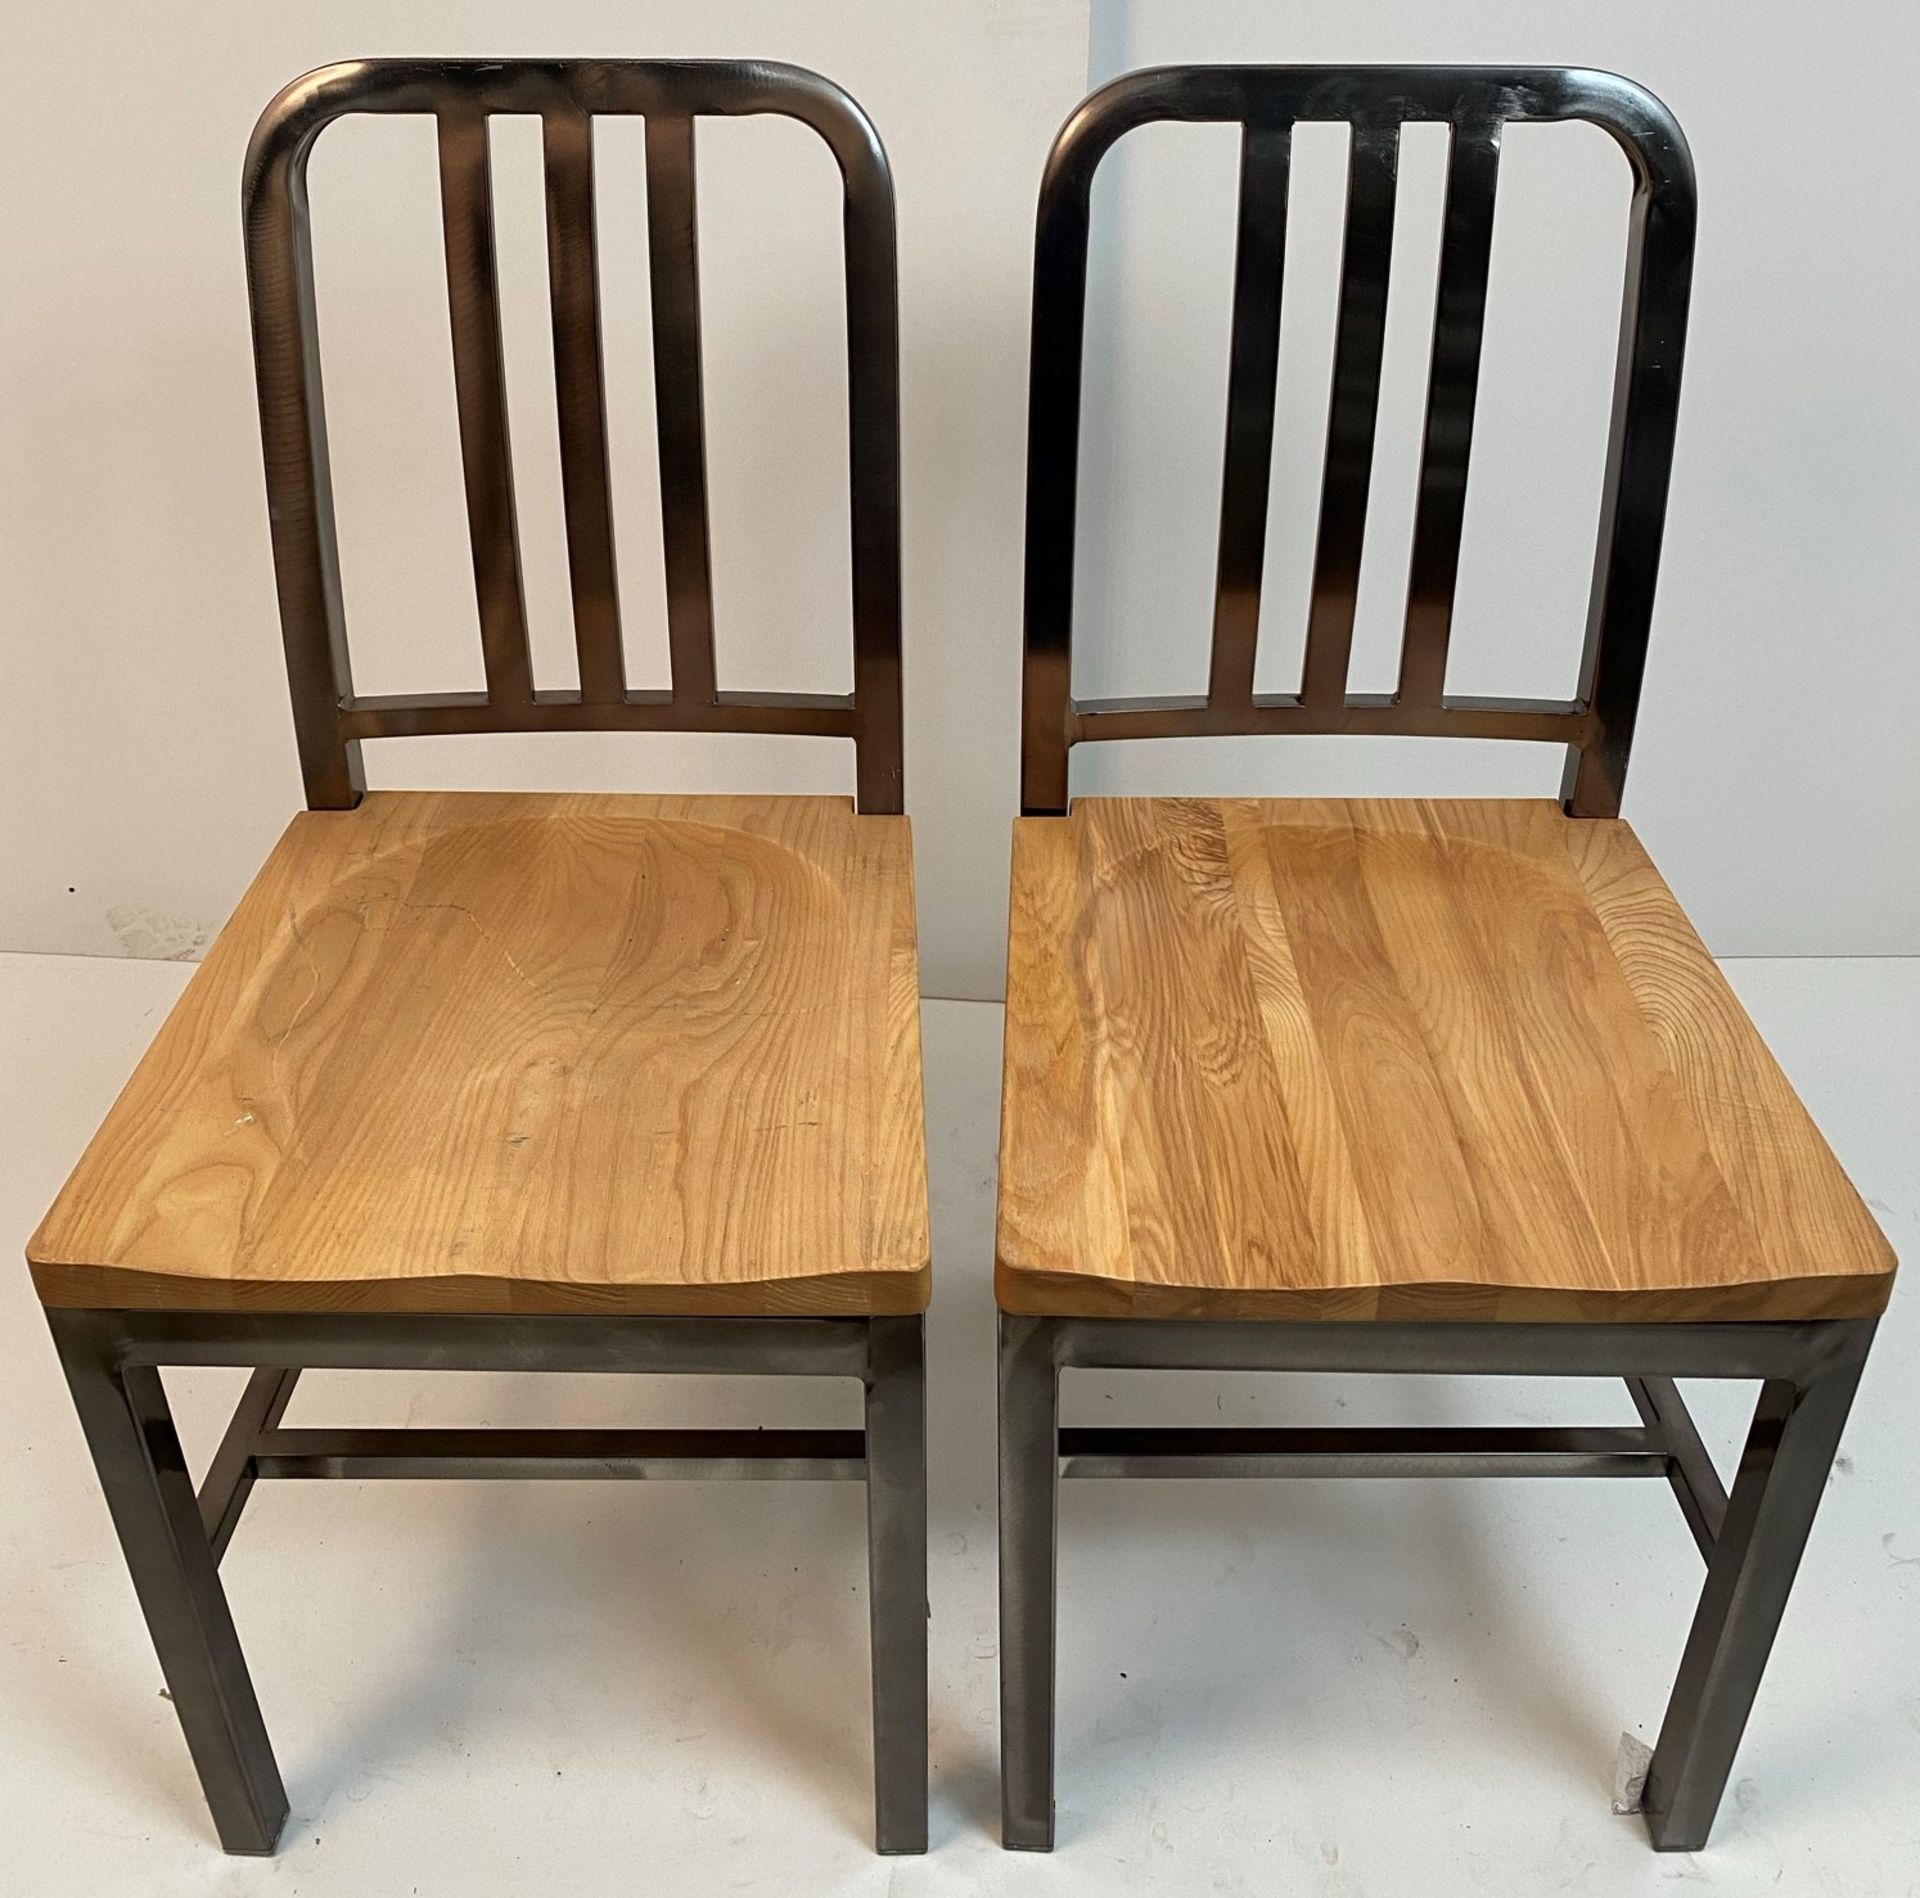 2 x Gun Metal Brushed Metal Framed Chairs with Wooden Seats